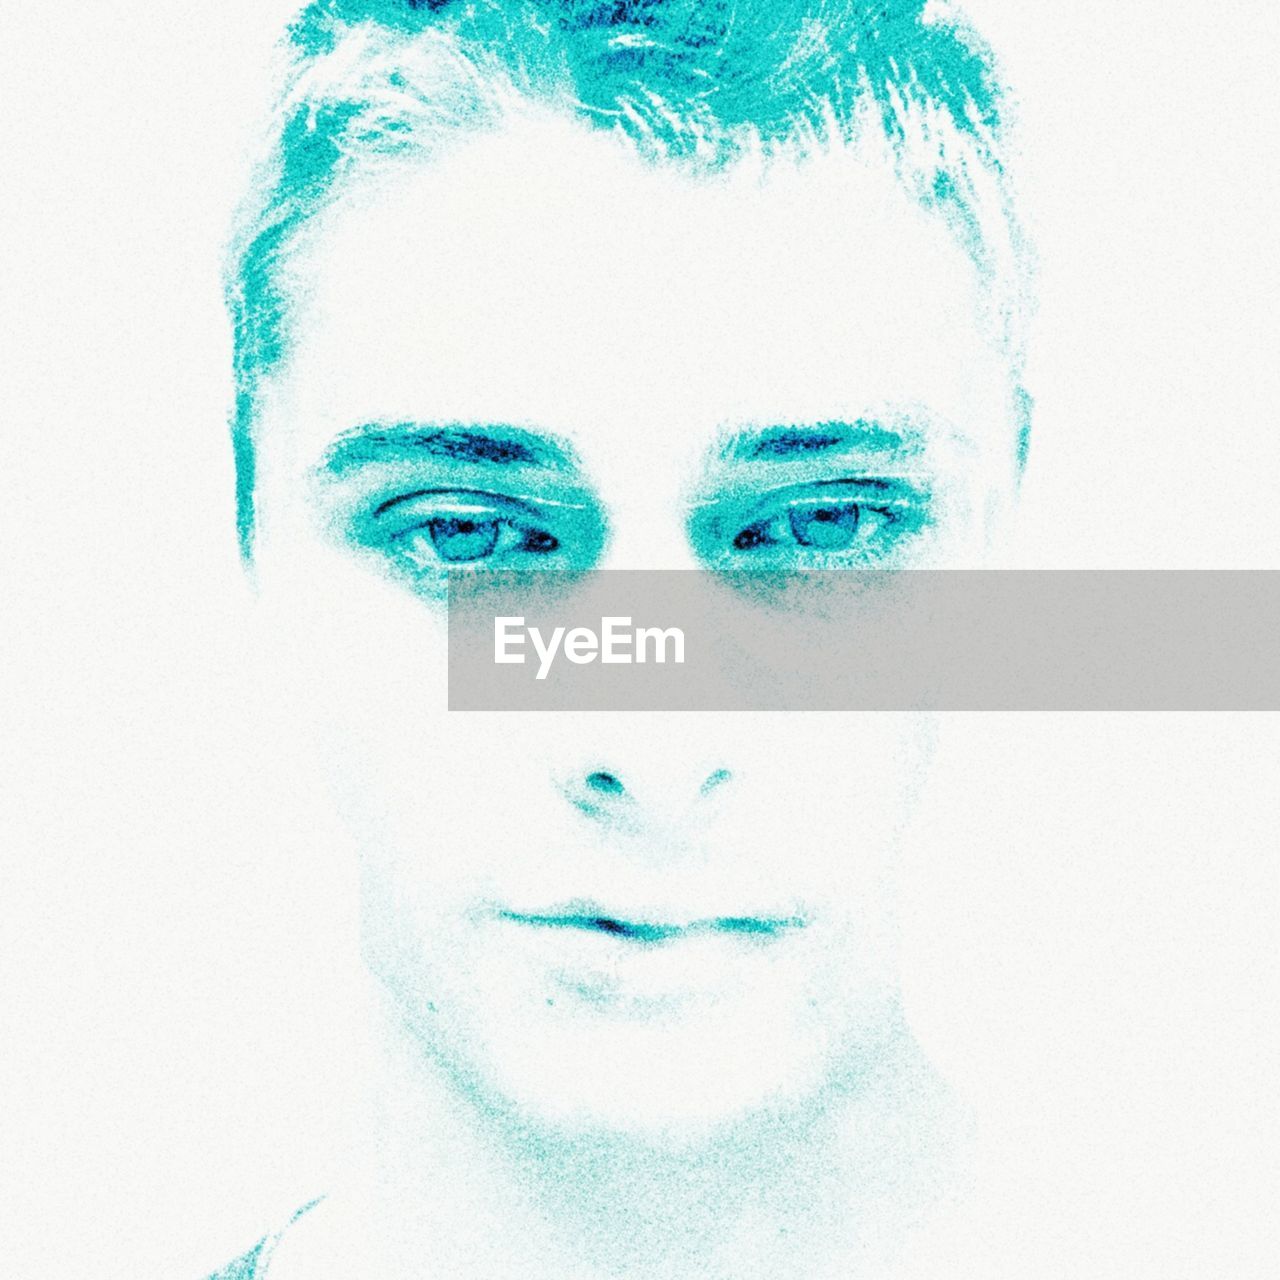 Digital composite image of young man against while background